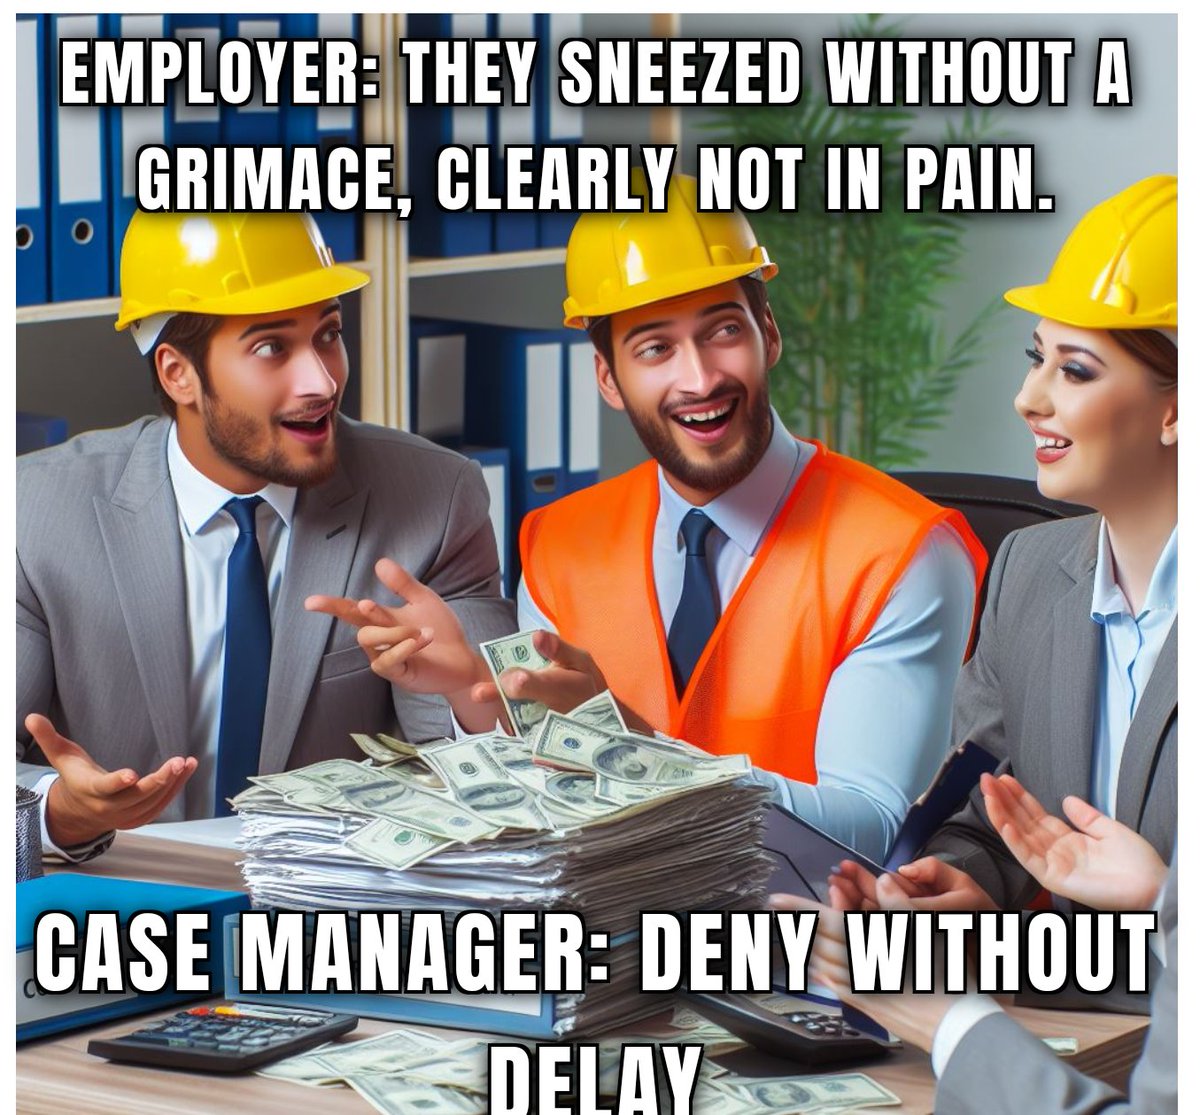 Assuming someone isn't in pain because they sneezed normally is unfair. Let's advocate for a system that considers all evidence and treats every claim with care. #WorkersComp #InjuredWorkers #FairTreatment #wsib #wcb